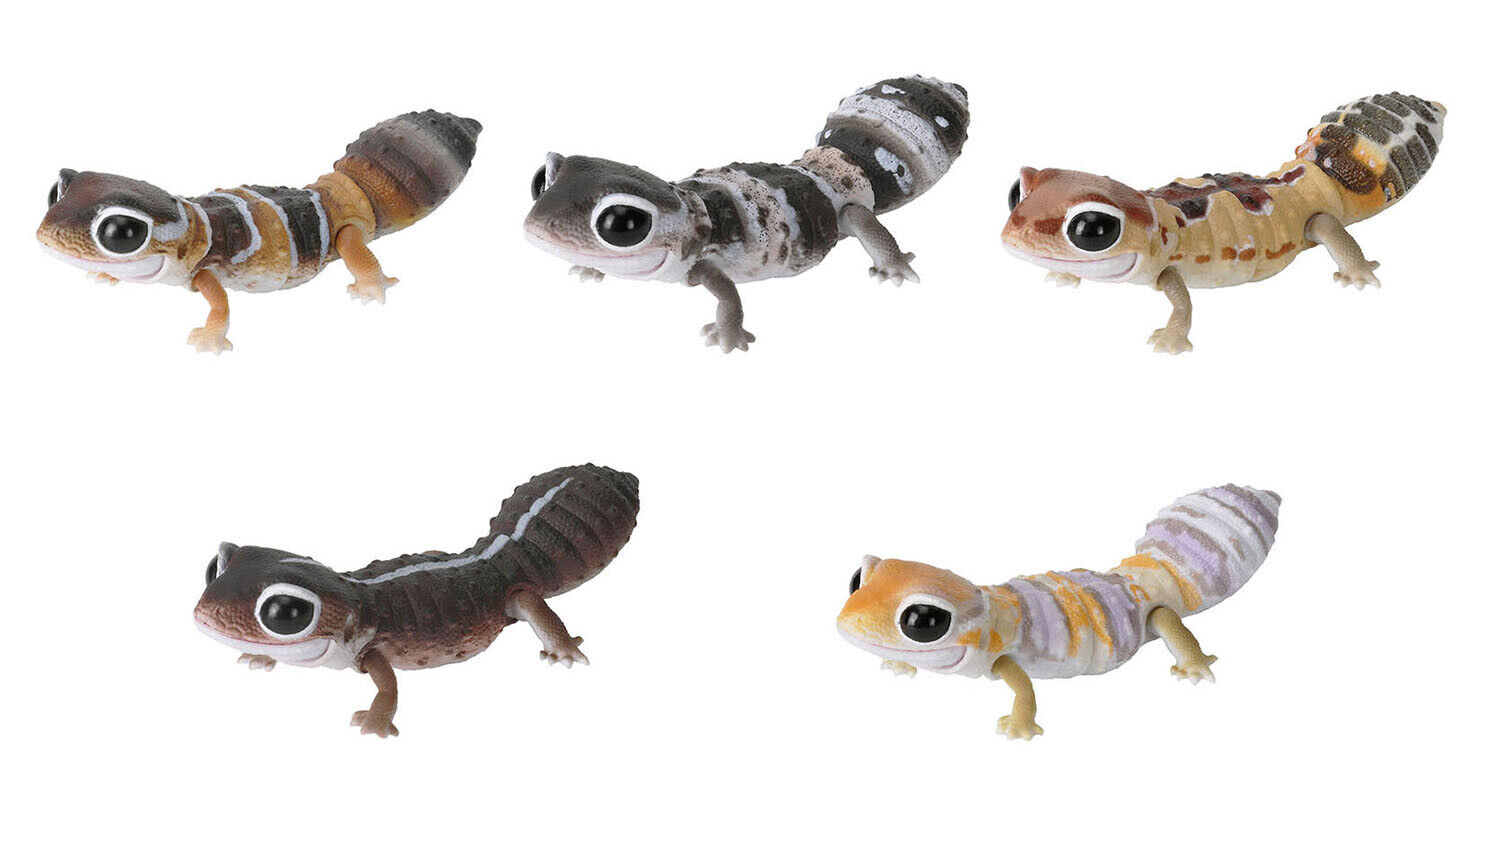 The Diversity of Life on Earth African Fat-Tailed Gecko Bandai Toys set of 5